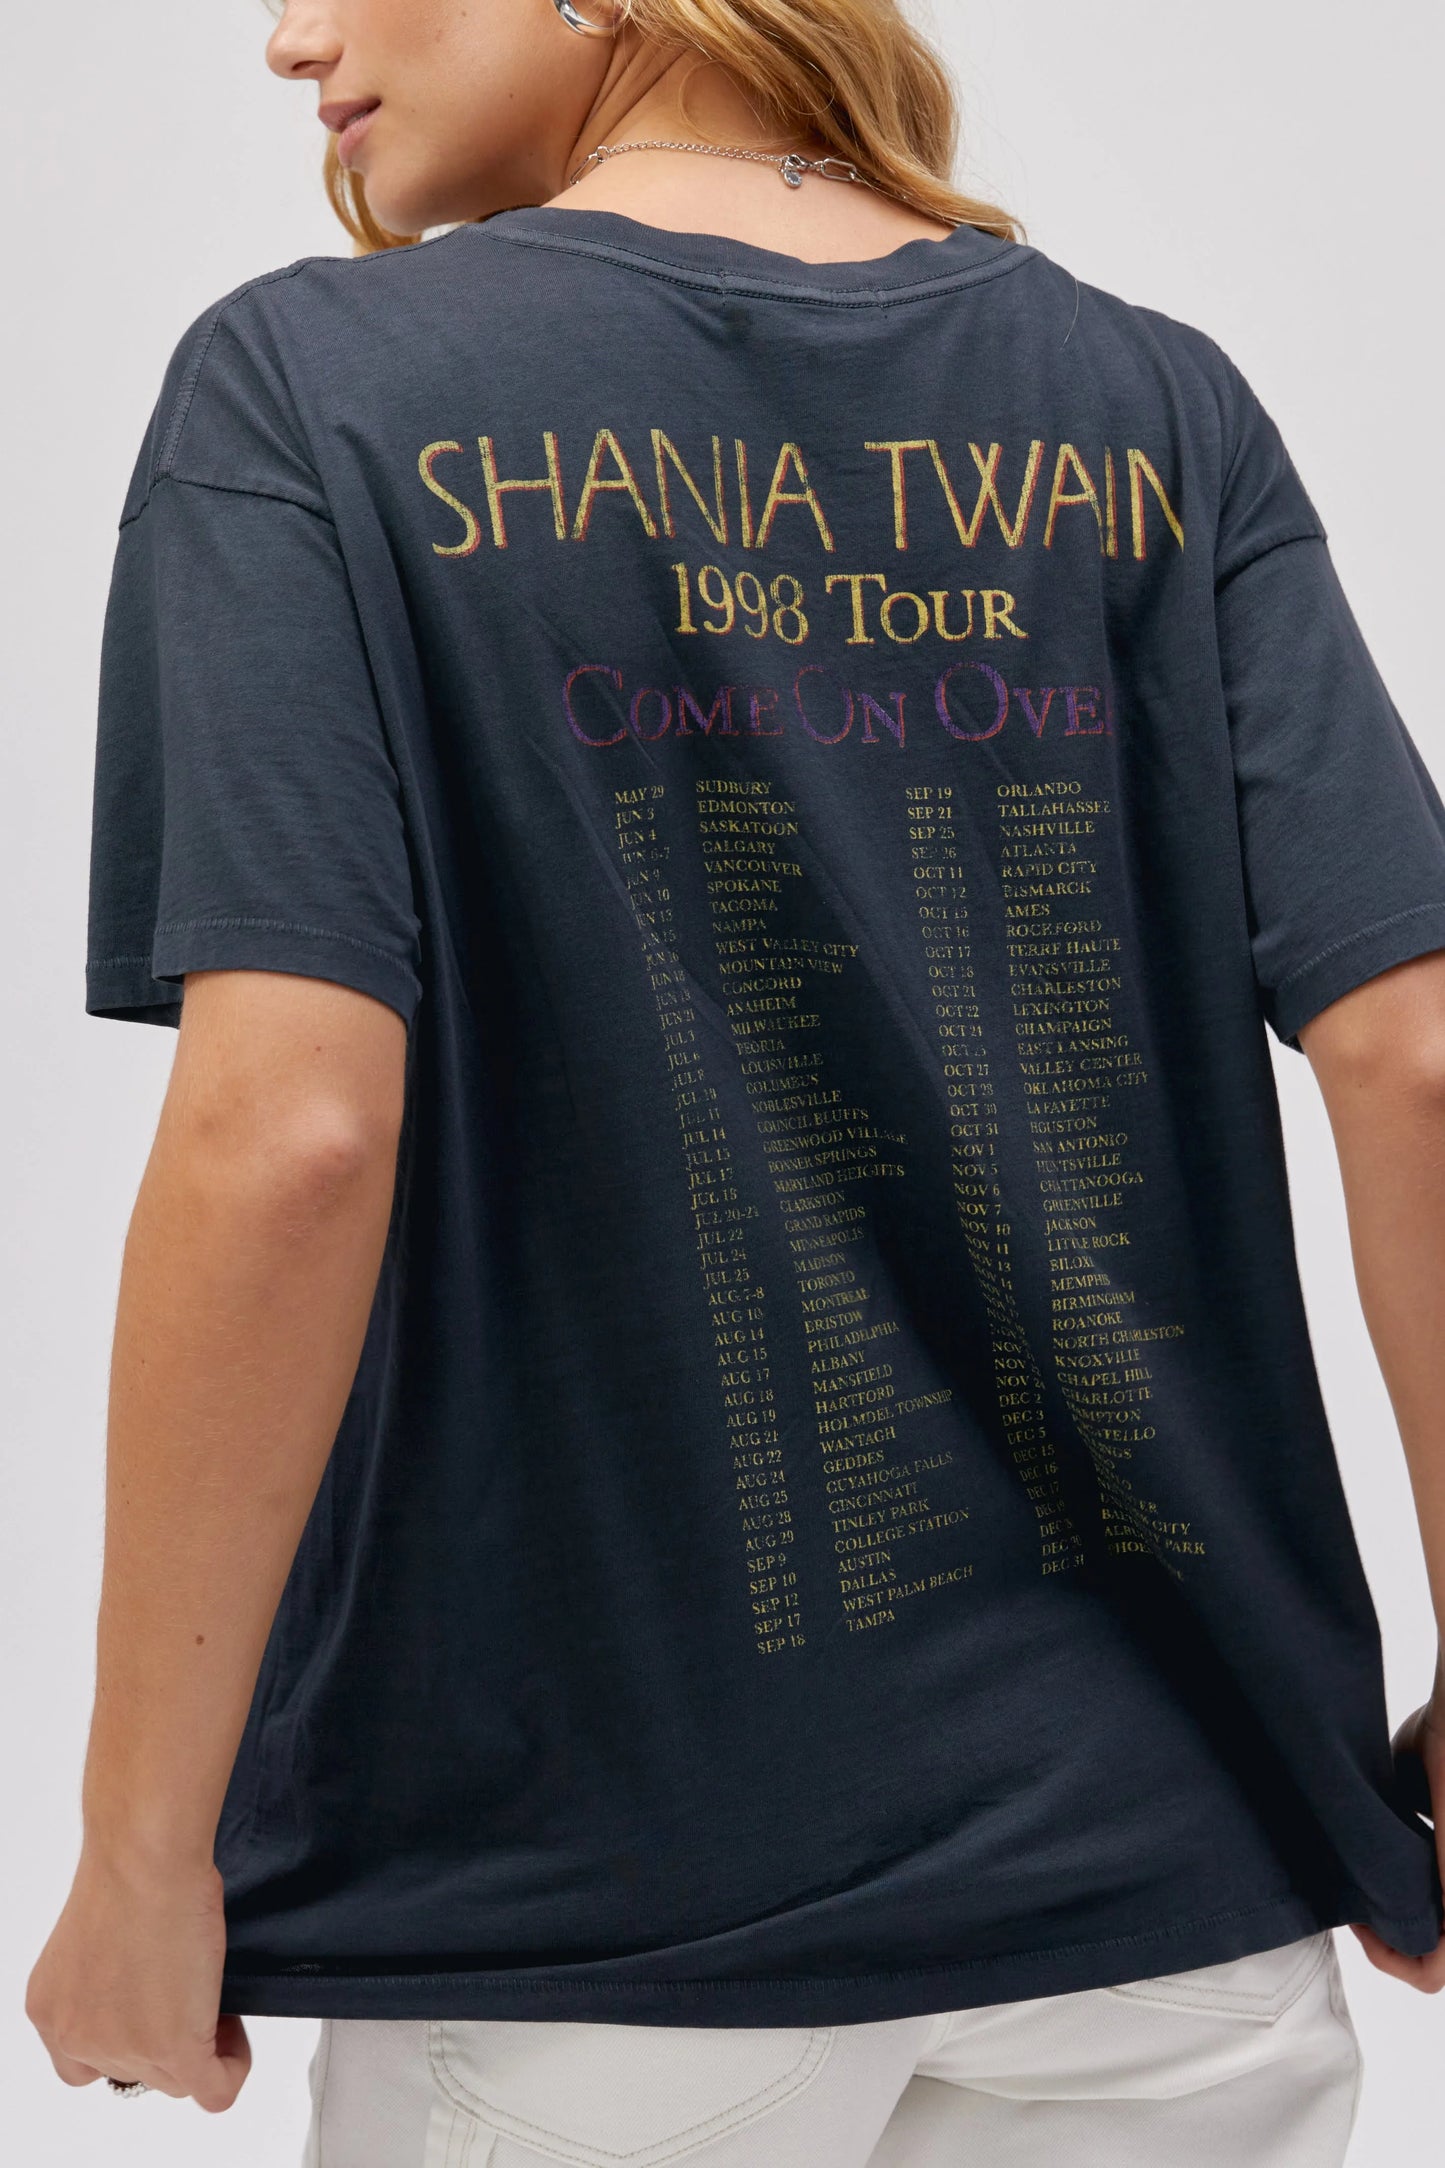 DayDreamer "Shania Twain Come On Over 1988 Tour Merch" T-Shirt W - Vintage Black